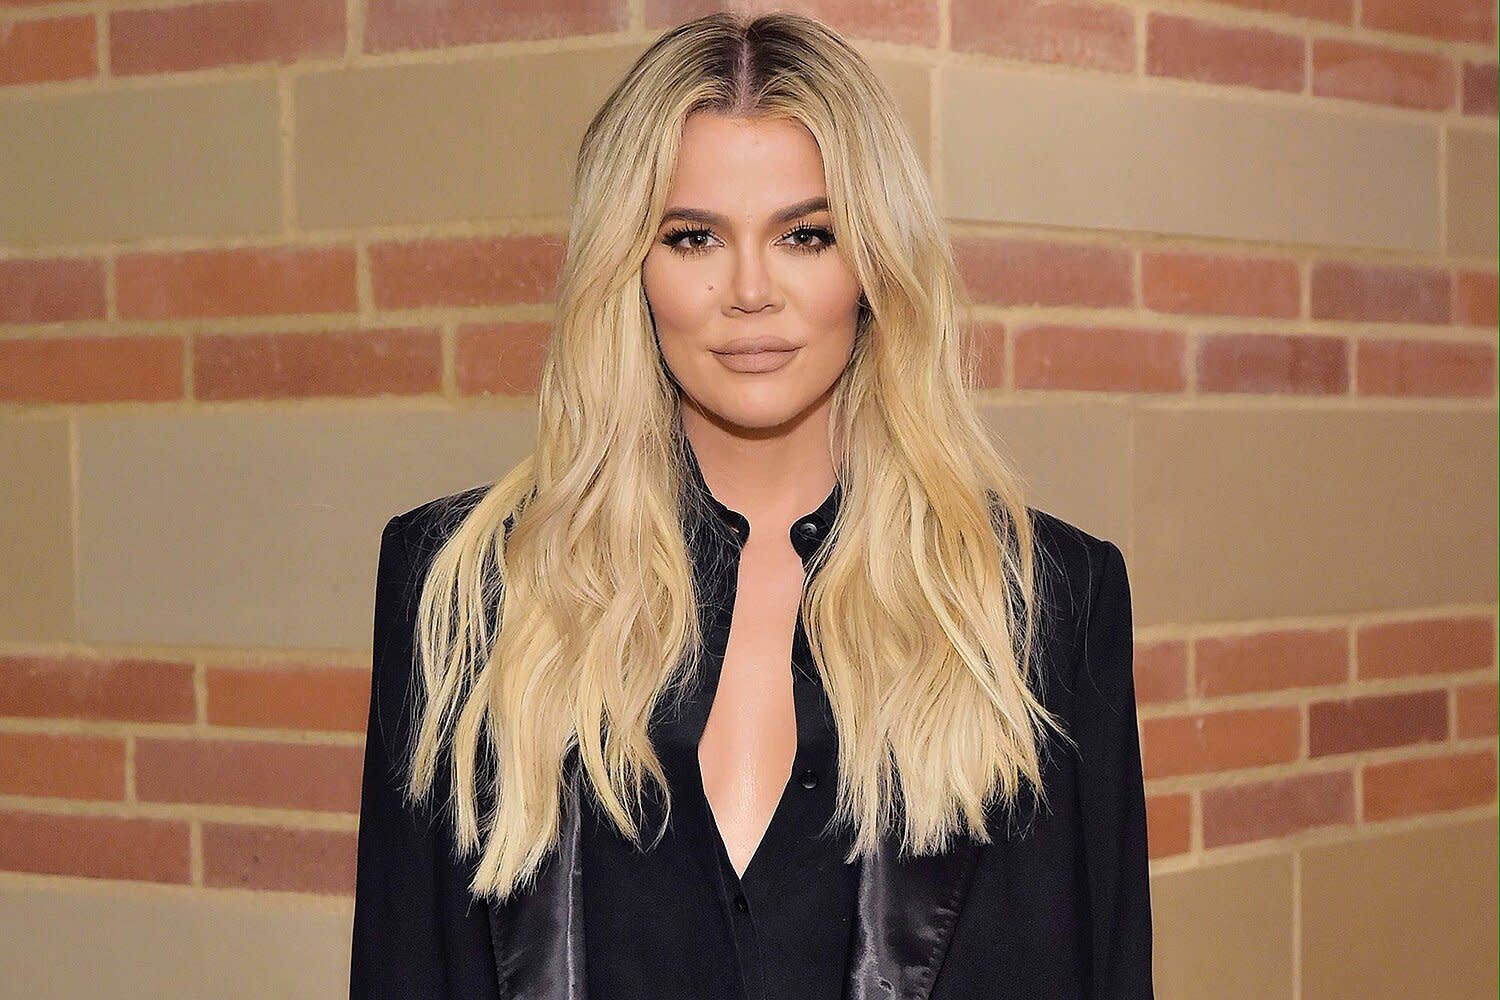 Khloé Kardashian considers surrogacy, reveals that she would have a “high-risk” pregnancy: “It’s scary”